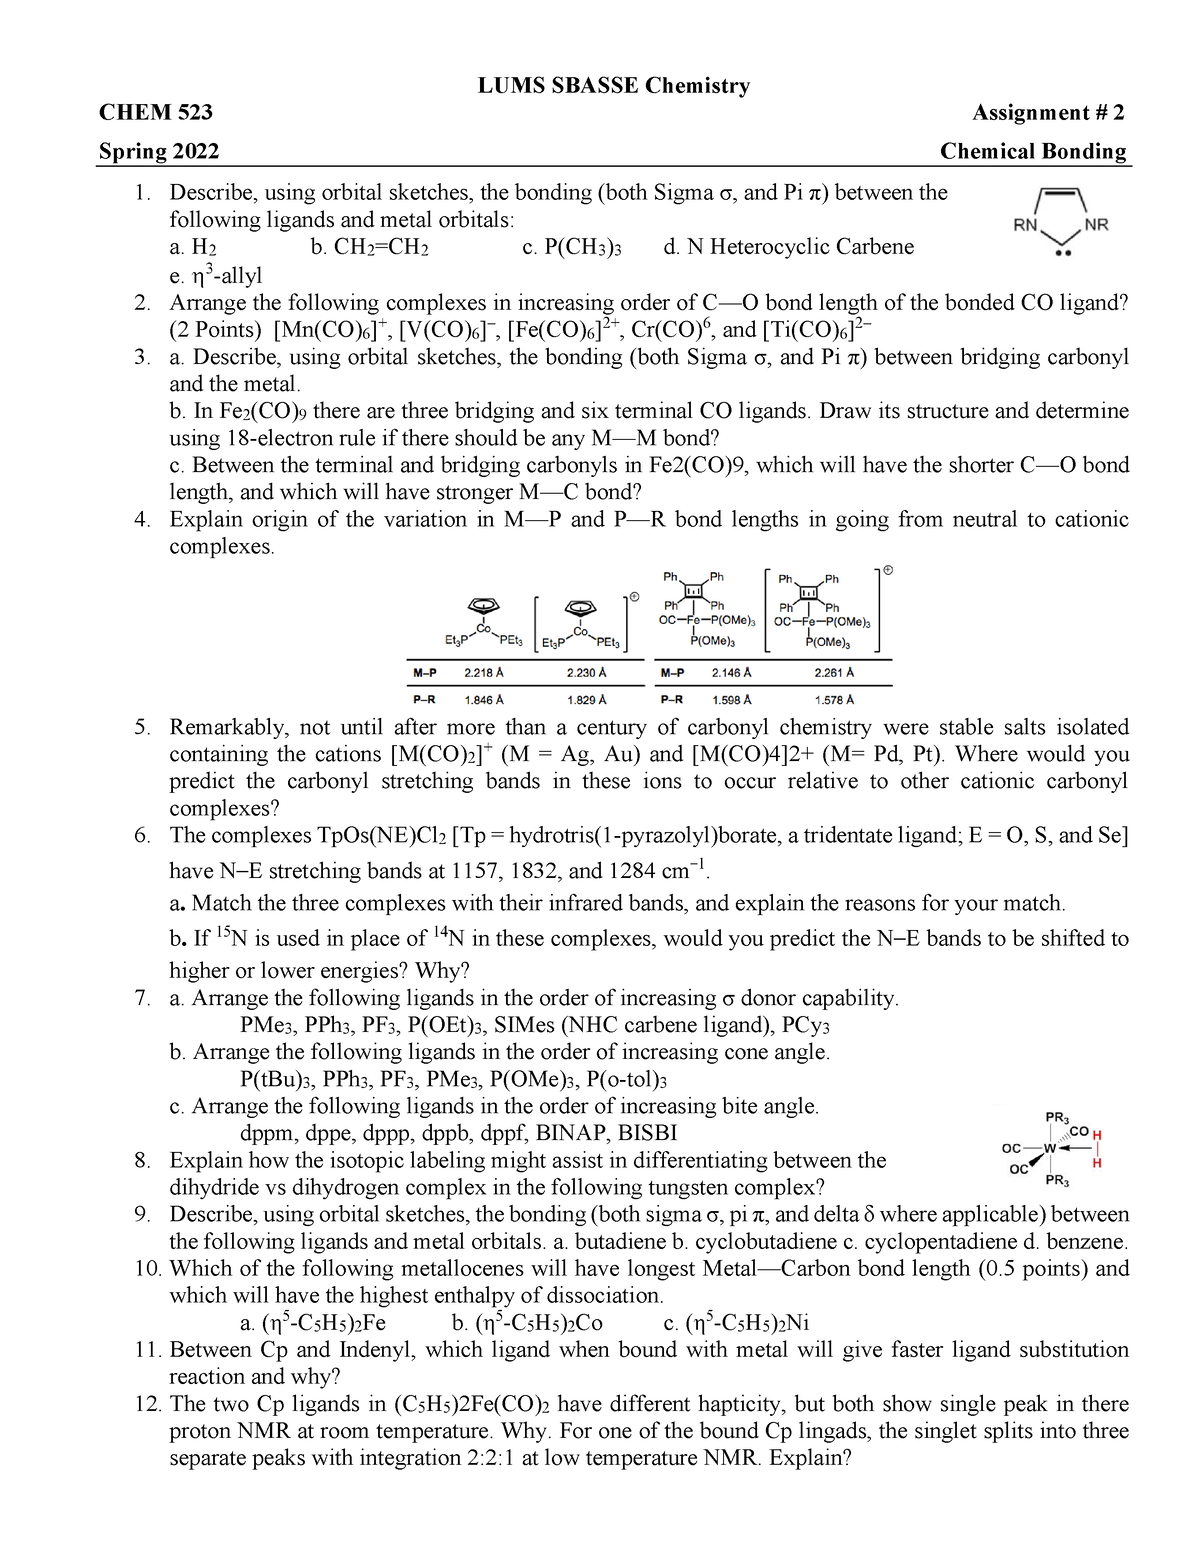 chemistry assignment 2022